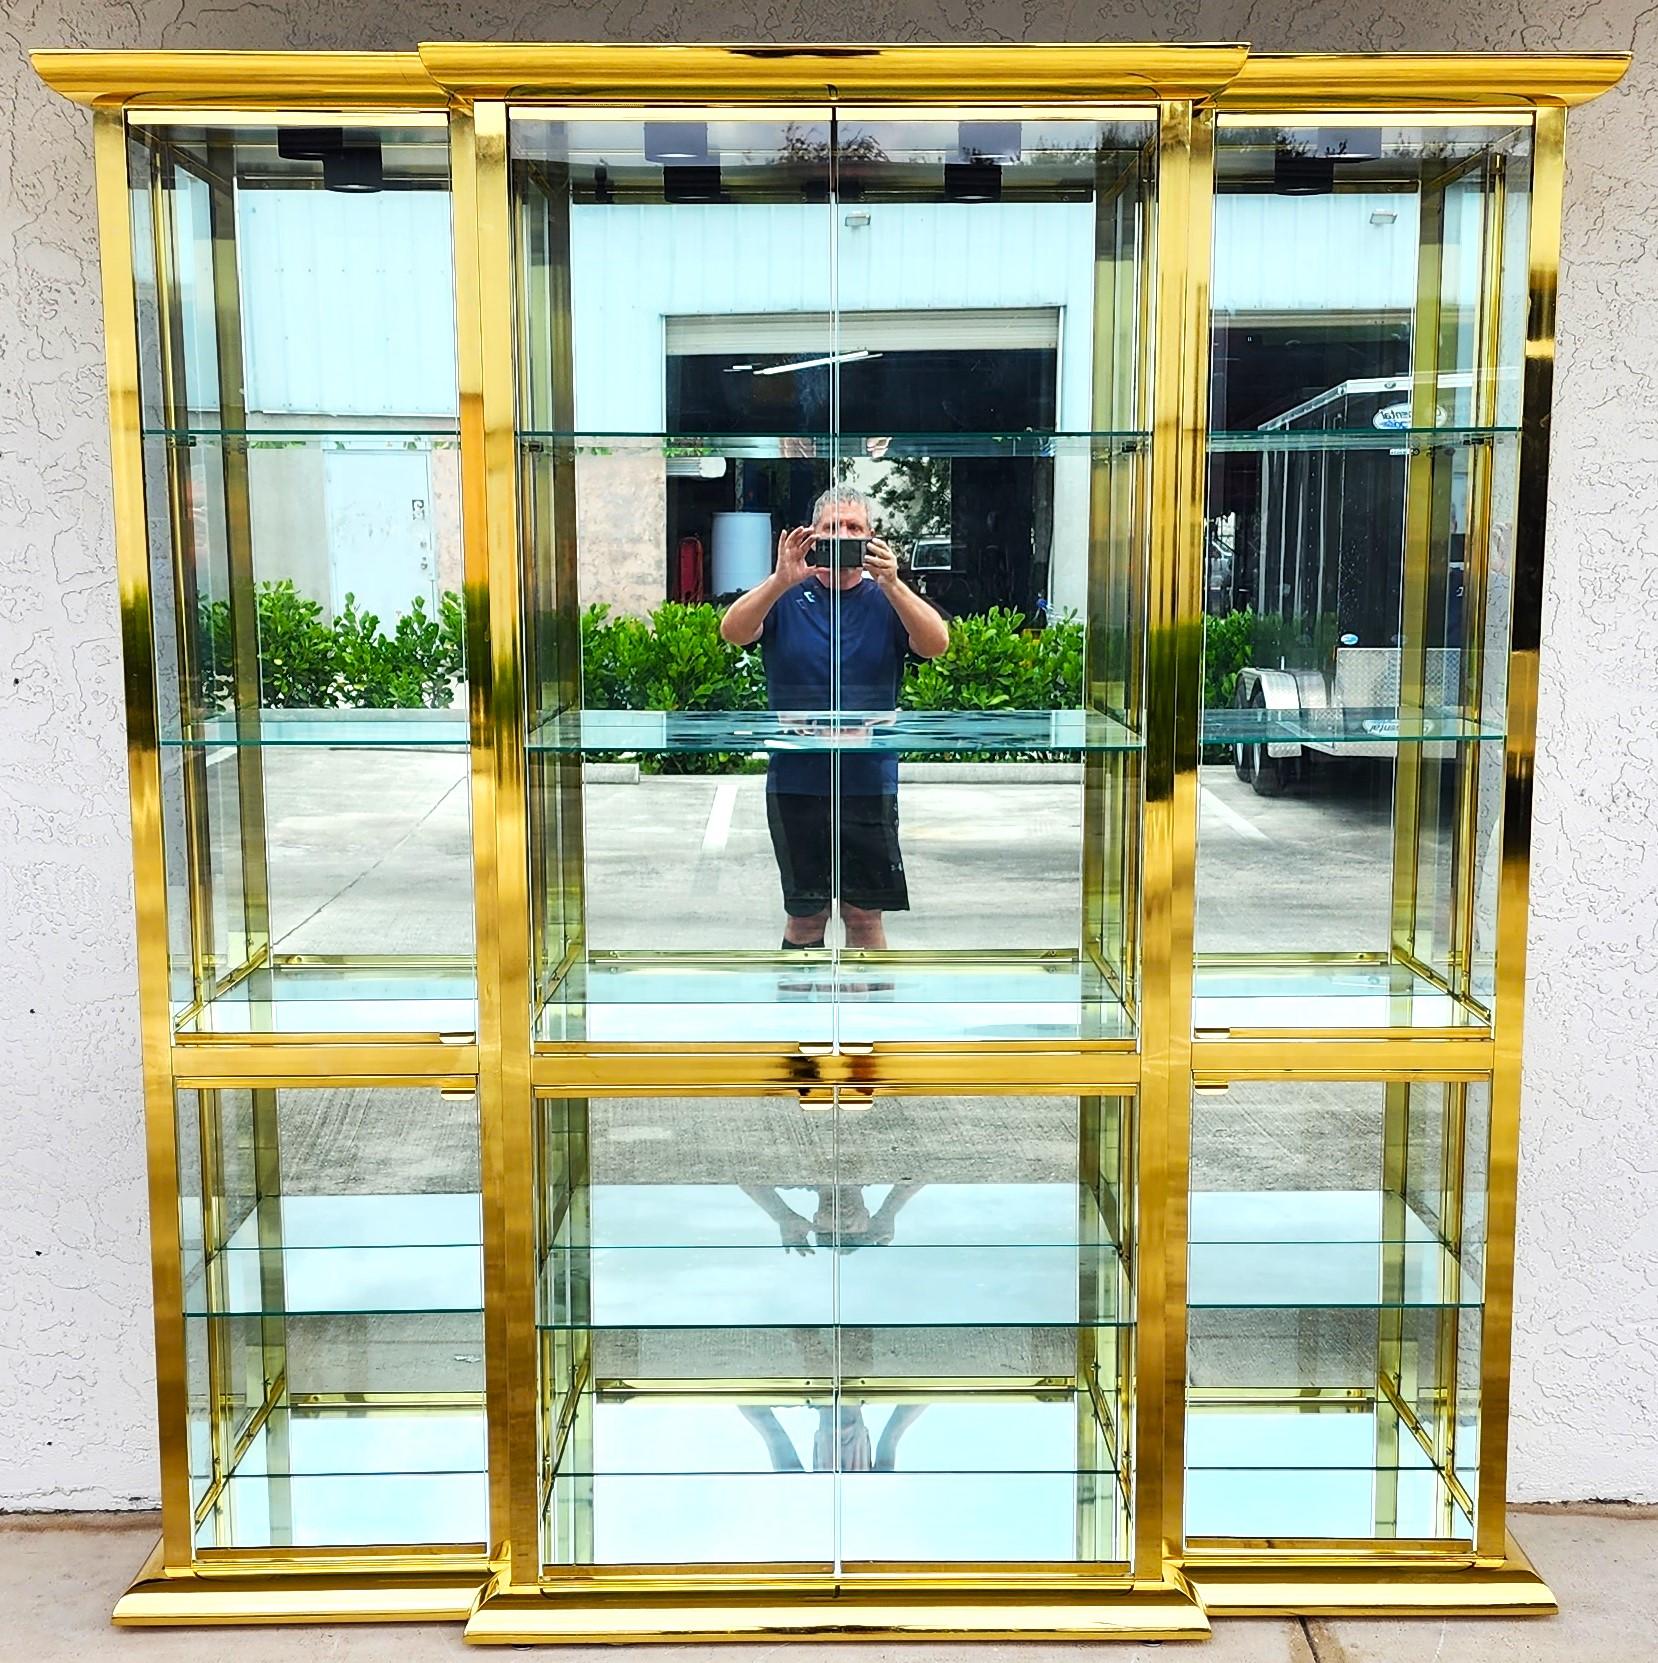 For FULL item description click on CONTINUE READING at the bottom of this page.

Offering One Of Our Recent Palm Beach Estate Fine Furniture Acquisitions Of An
Exceptional Vintage 1970s Display Case Vitrine by Design Institute of America (DIA)

This